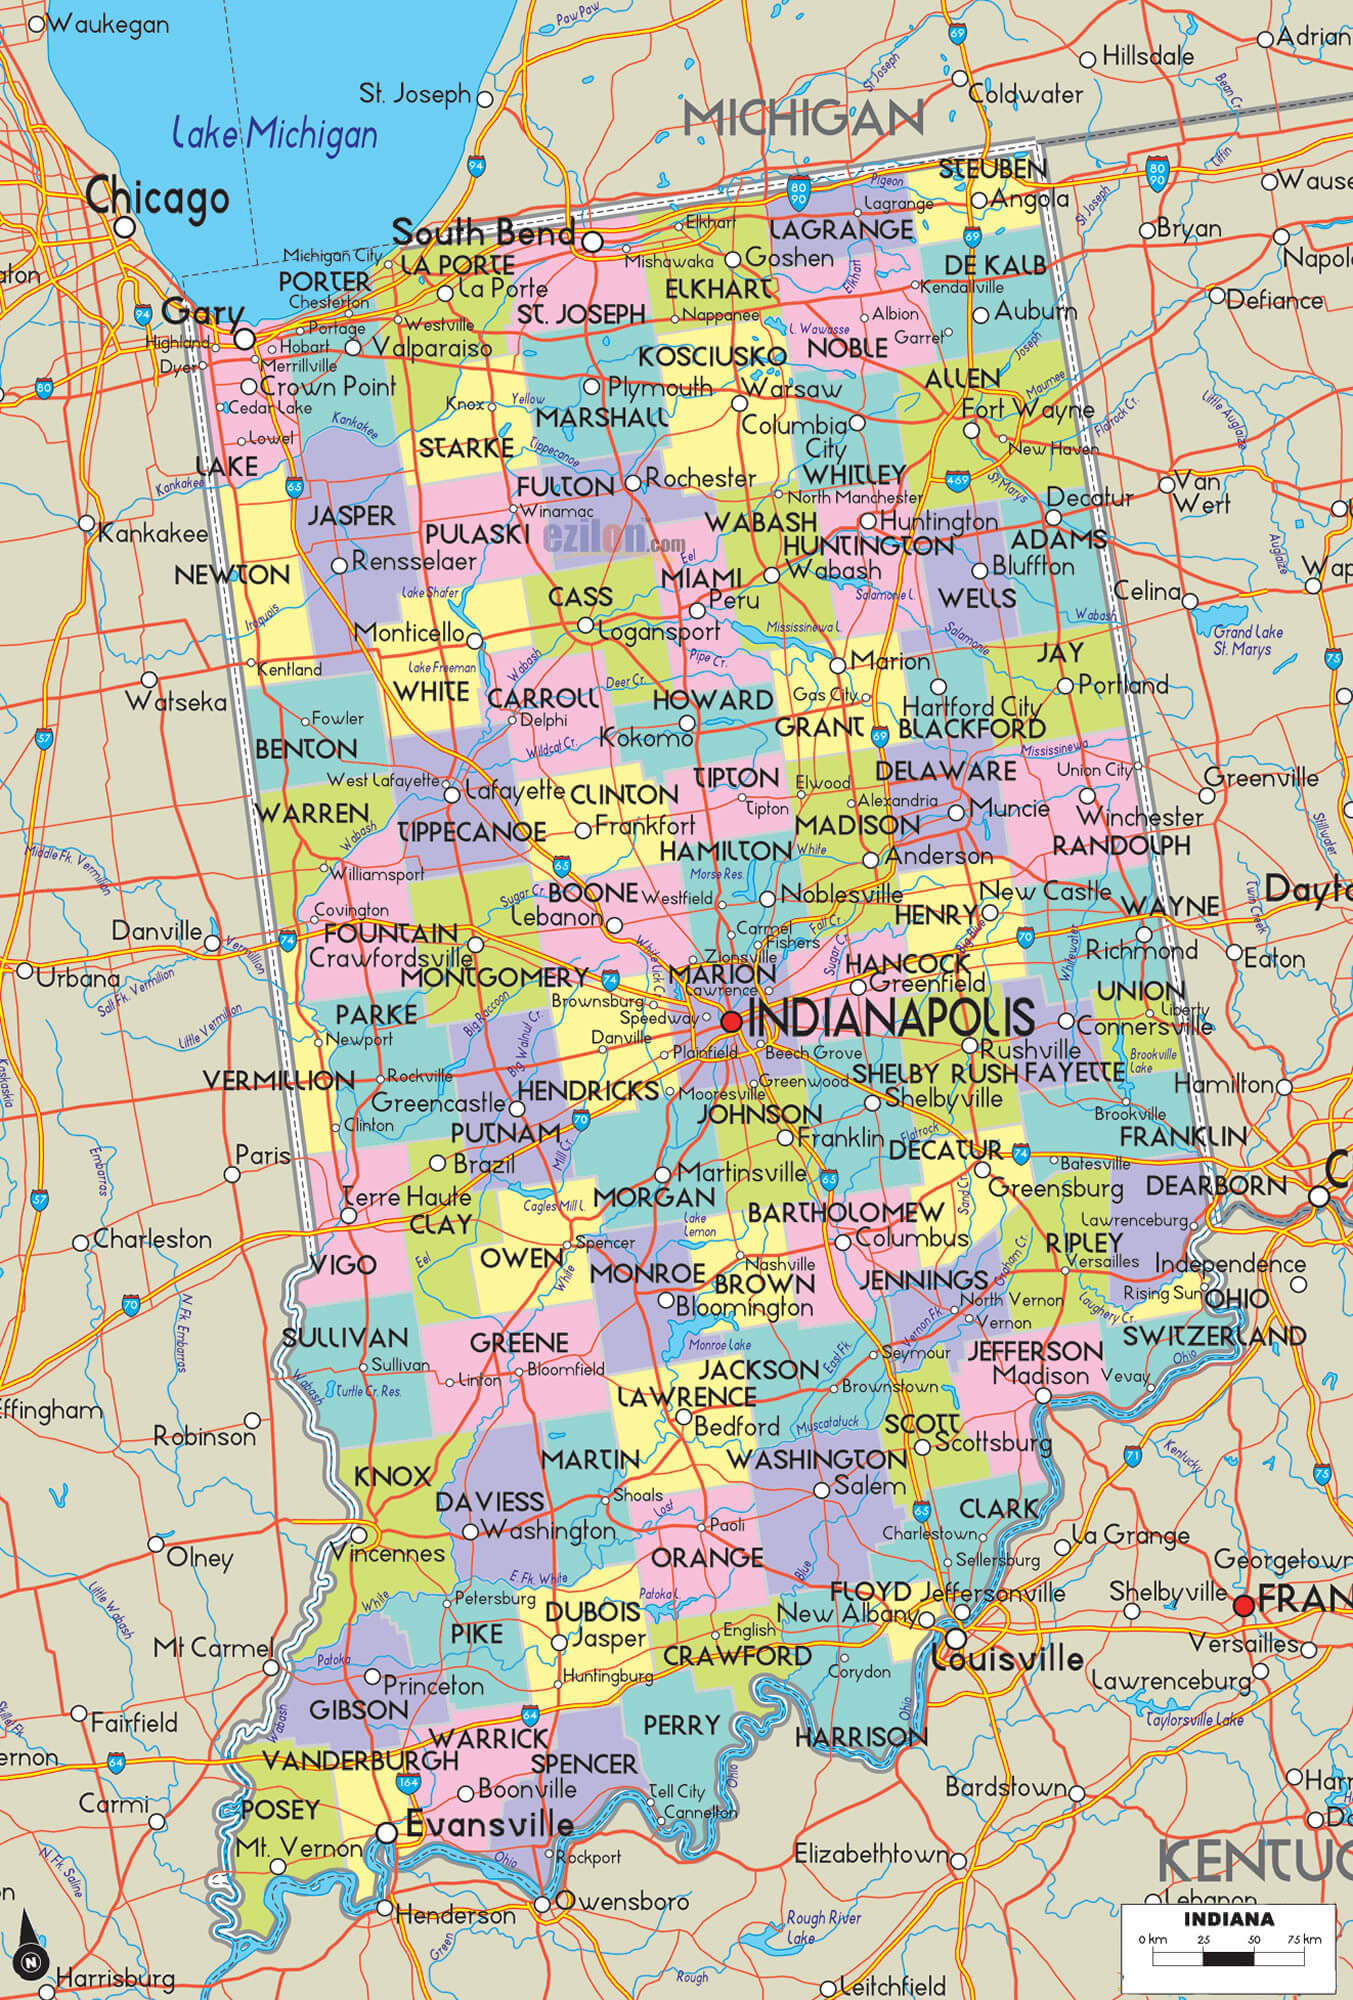 Indiana Counties Road Map USA